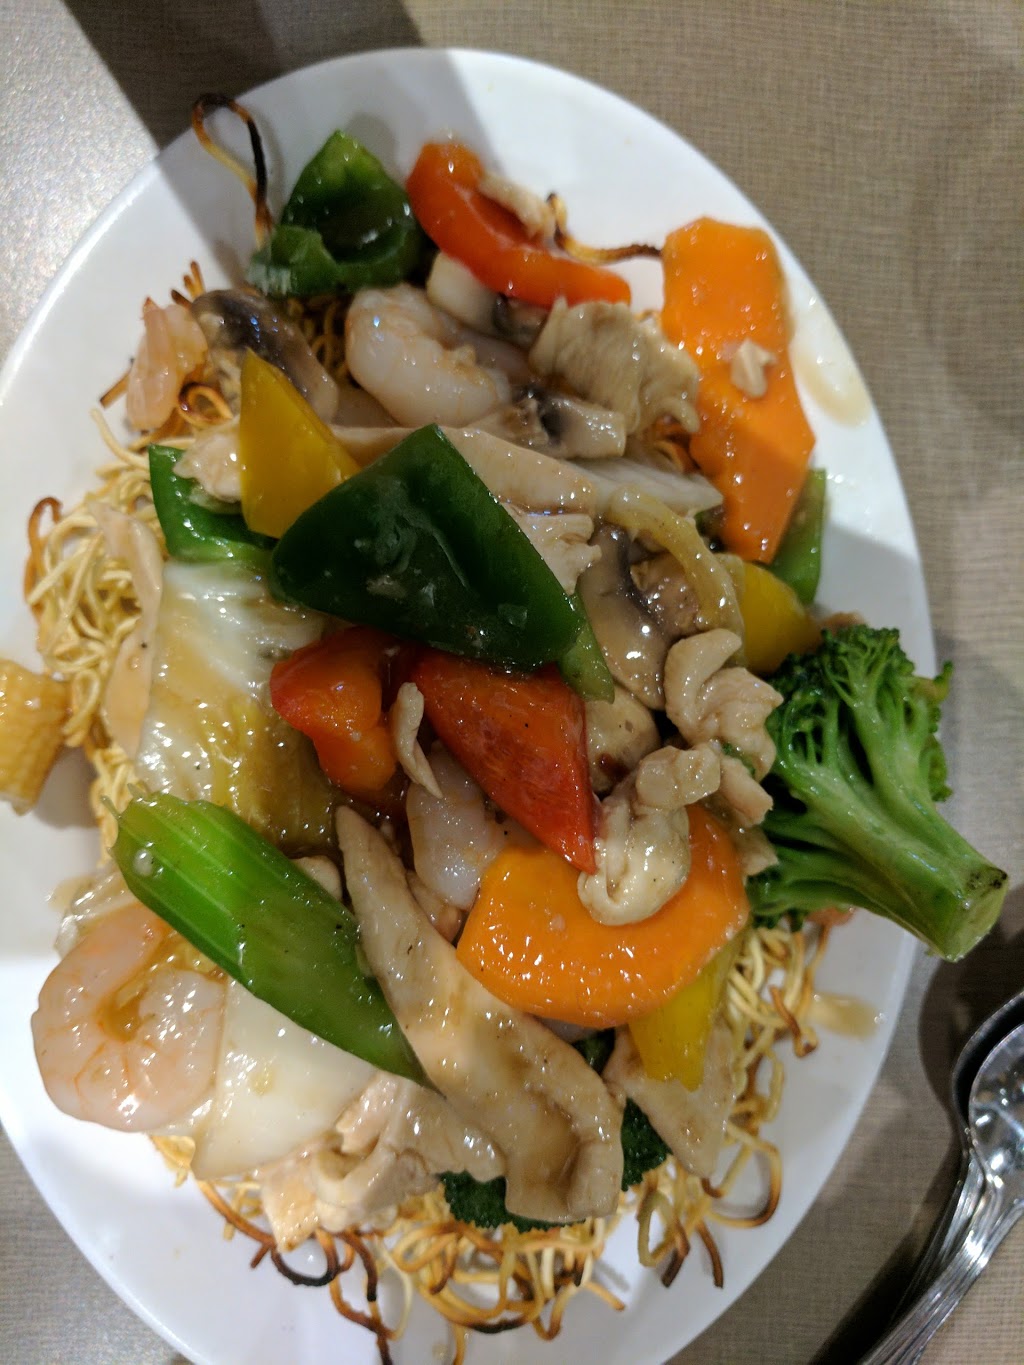 Wok With Yu | meal delivery | 4000 Steeles Ave W #15, Woodbridge, ON L4L 4V9, Canada | 9058563109 OR +1 905-856-3109